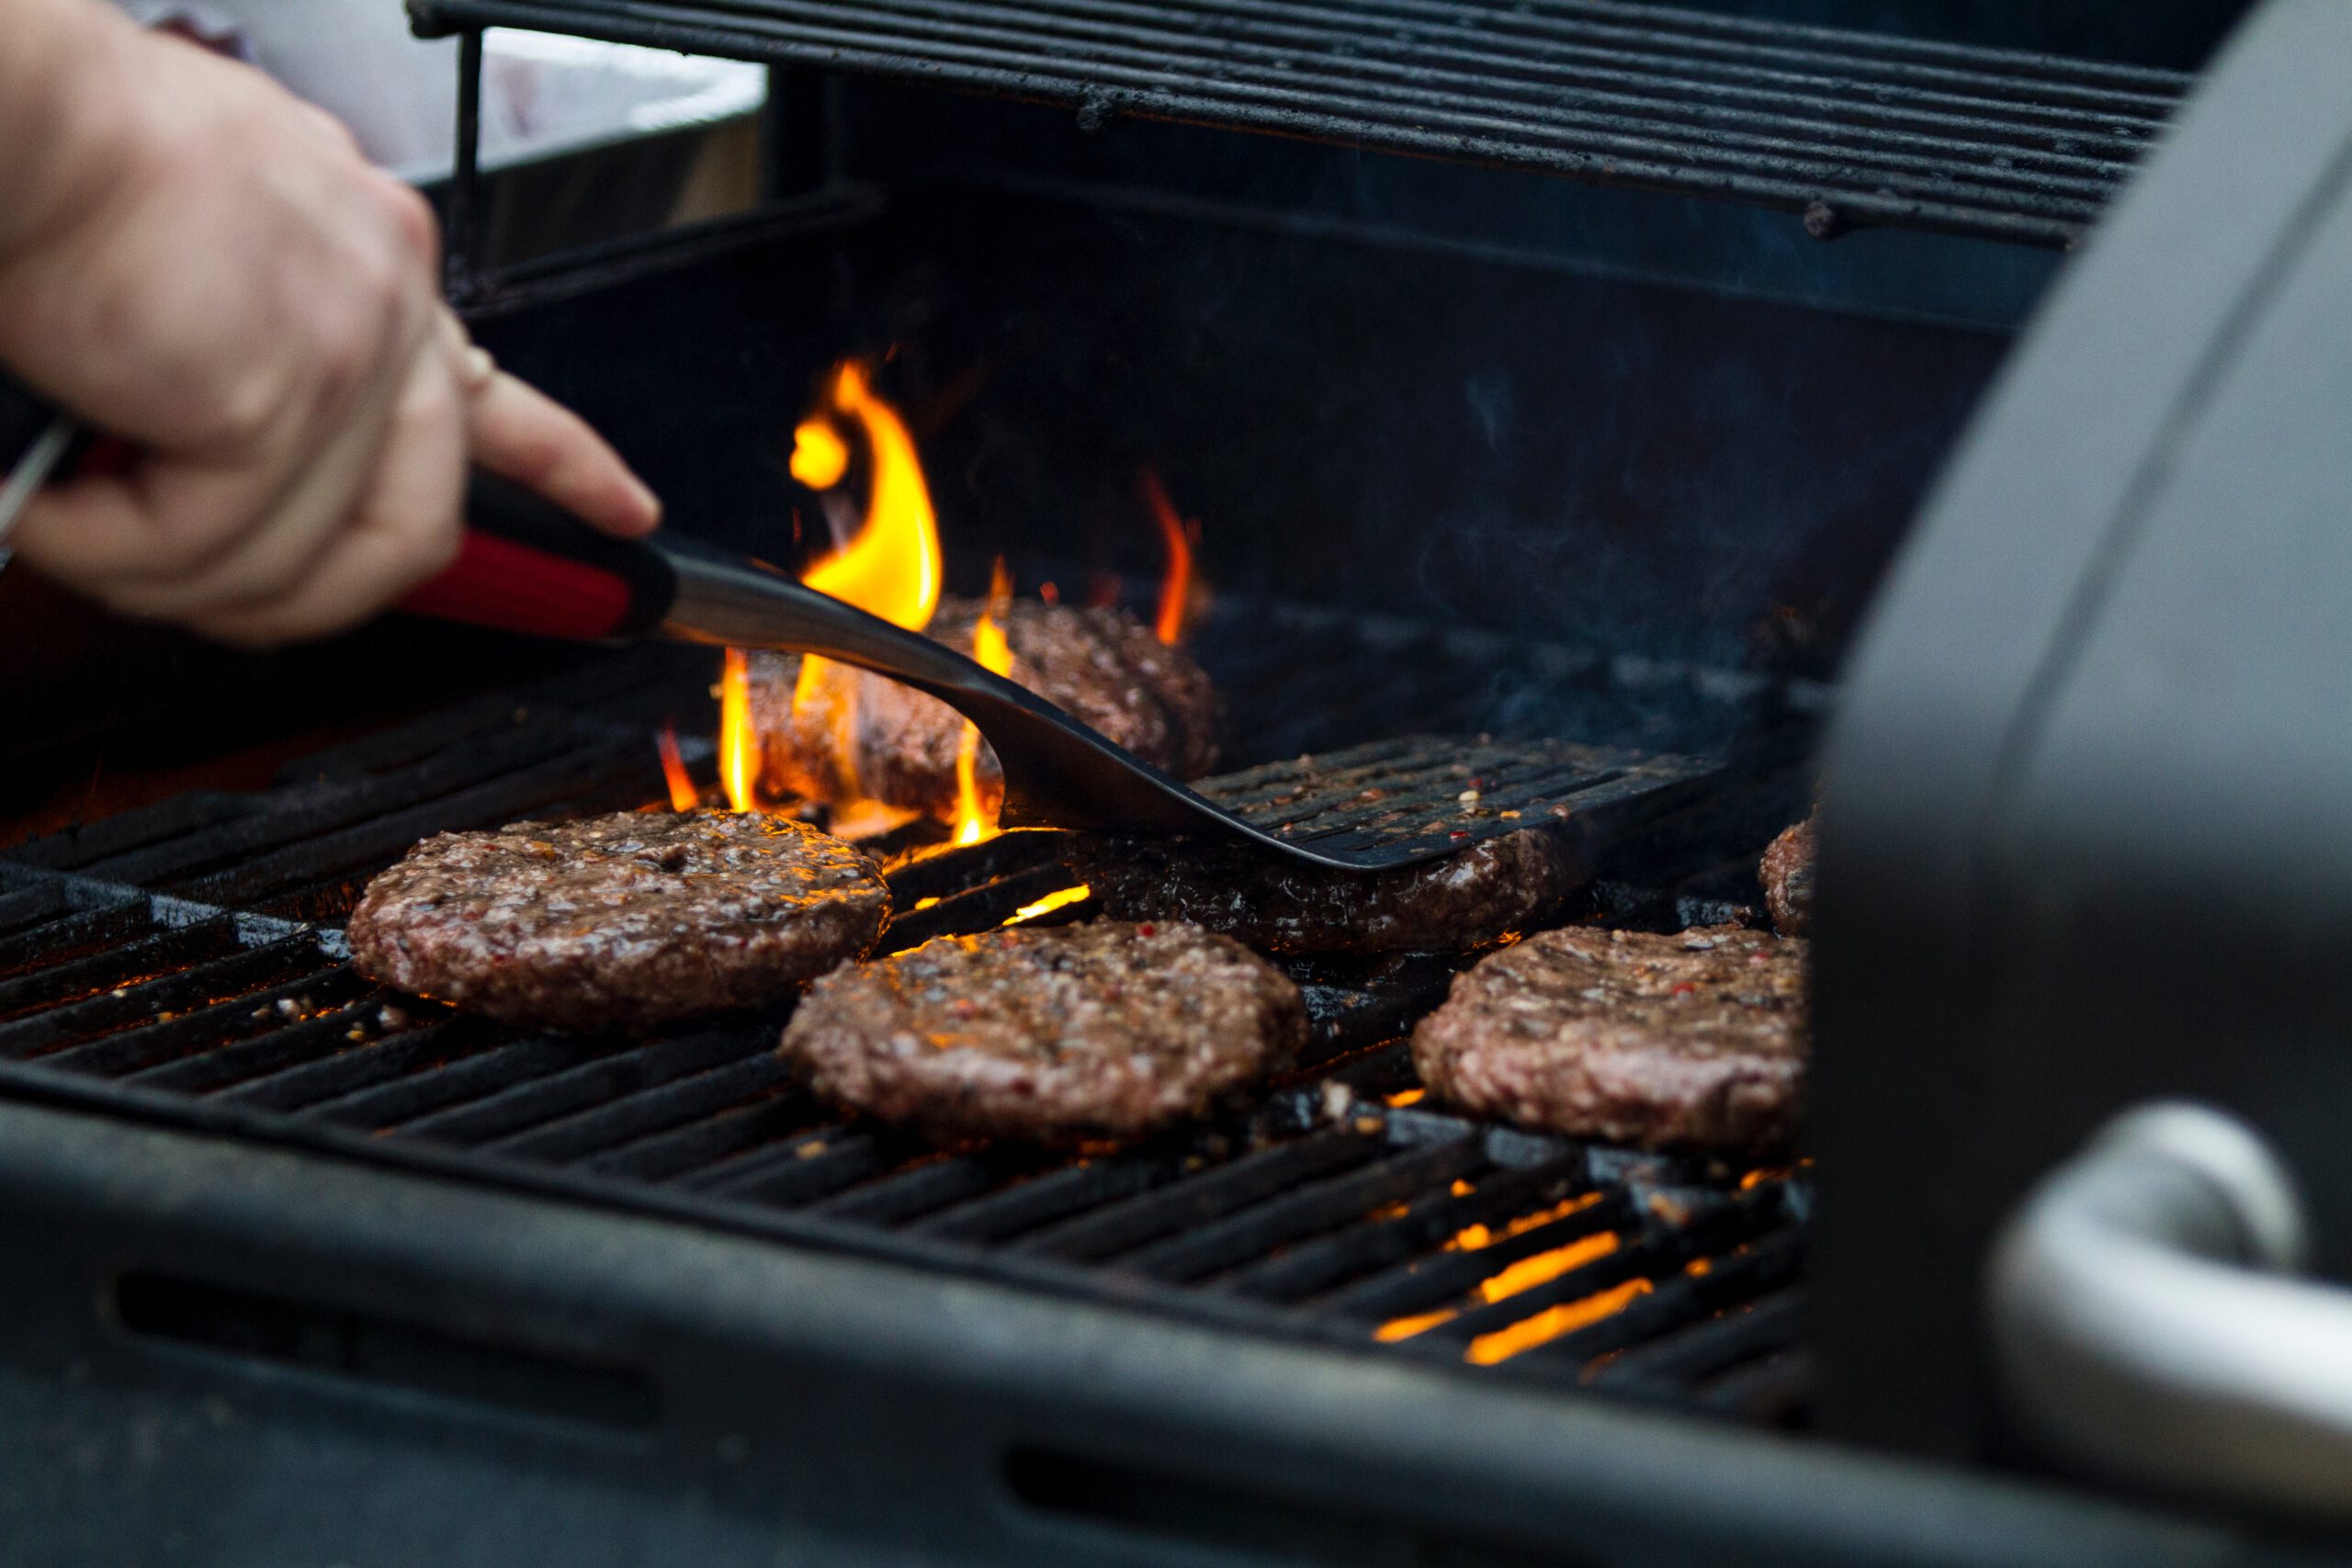 grill guide 2022 best grill july 4 cookout